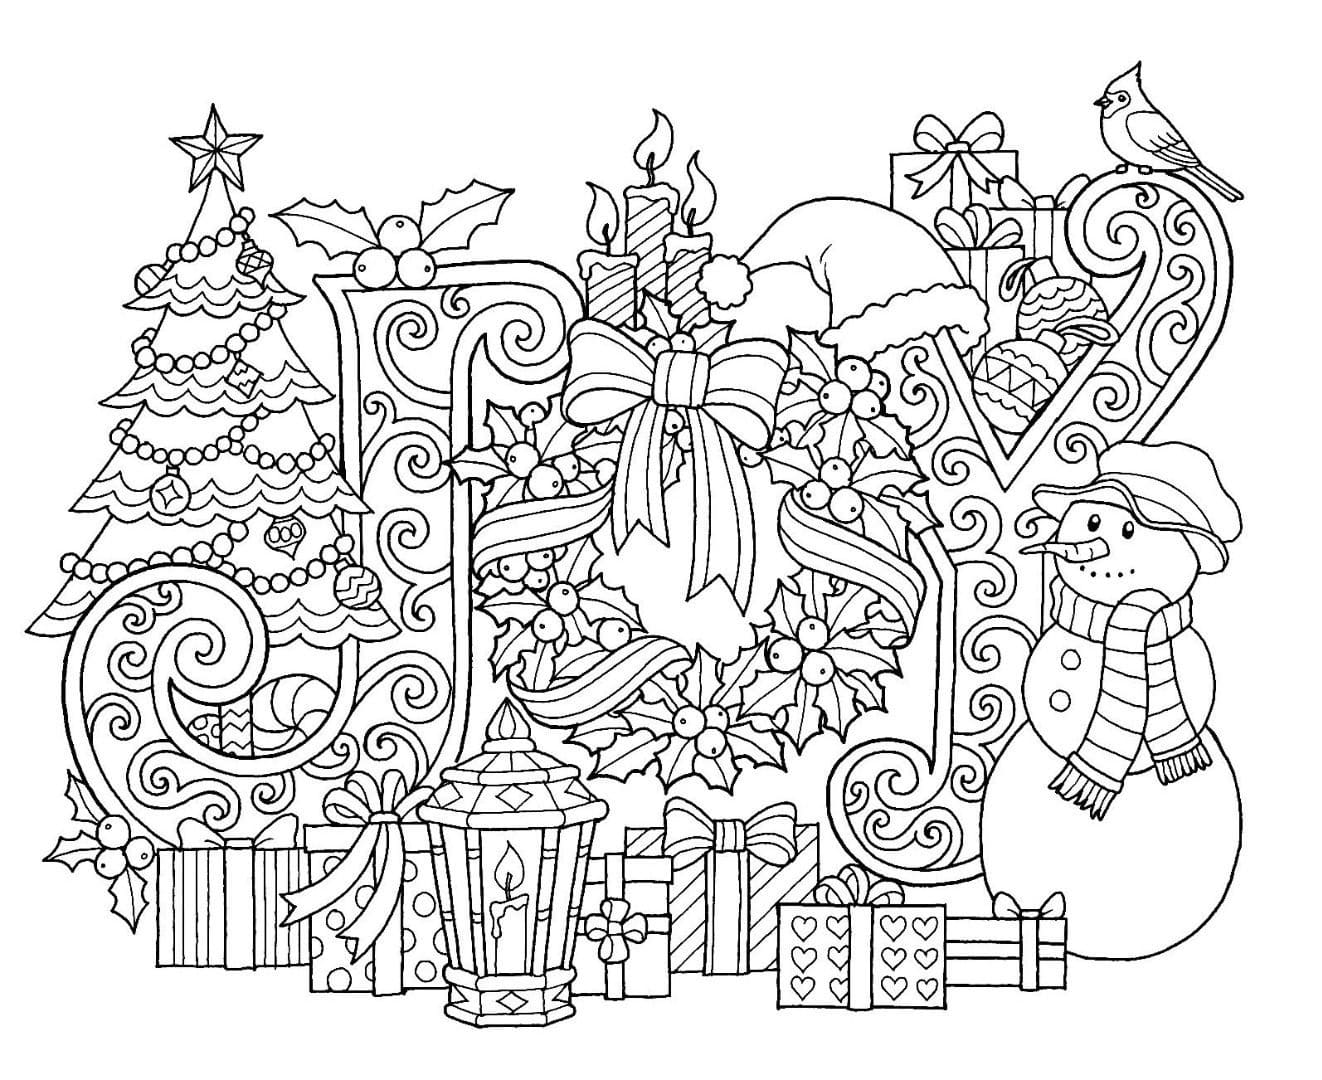 Everything Ready For The New Year Coloring Page